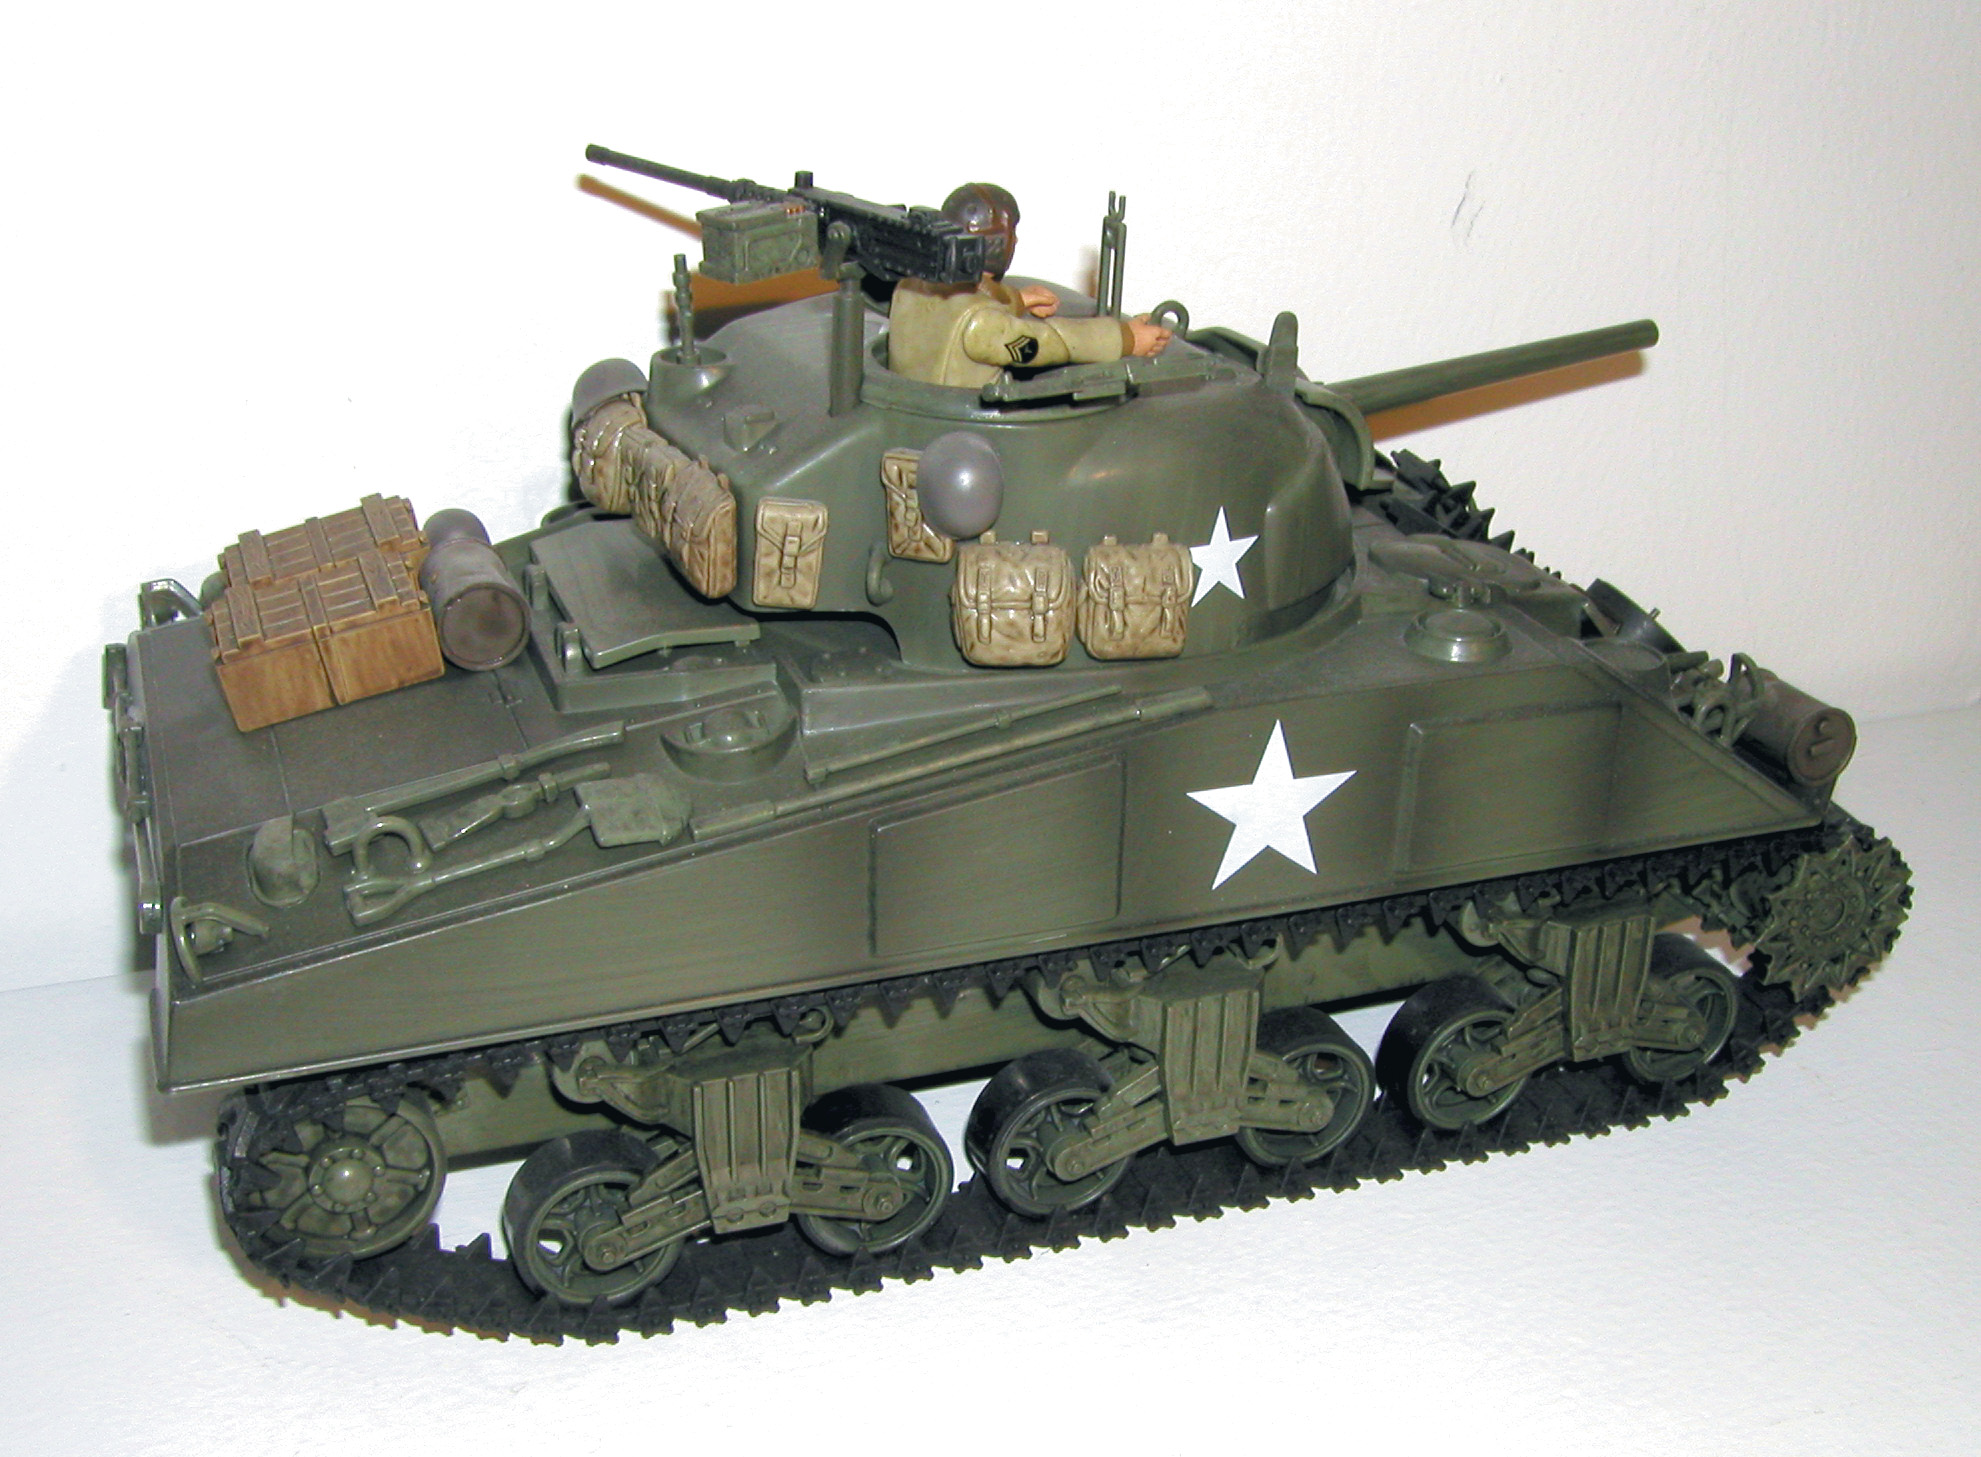 From the author’s collection, a 1/18 scale American Sherman tank made by 21st Century Toys.